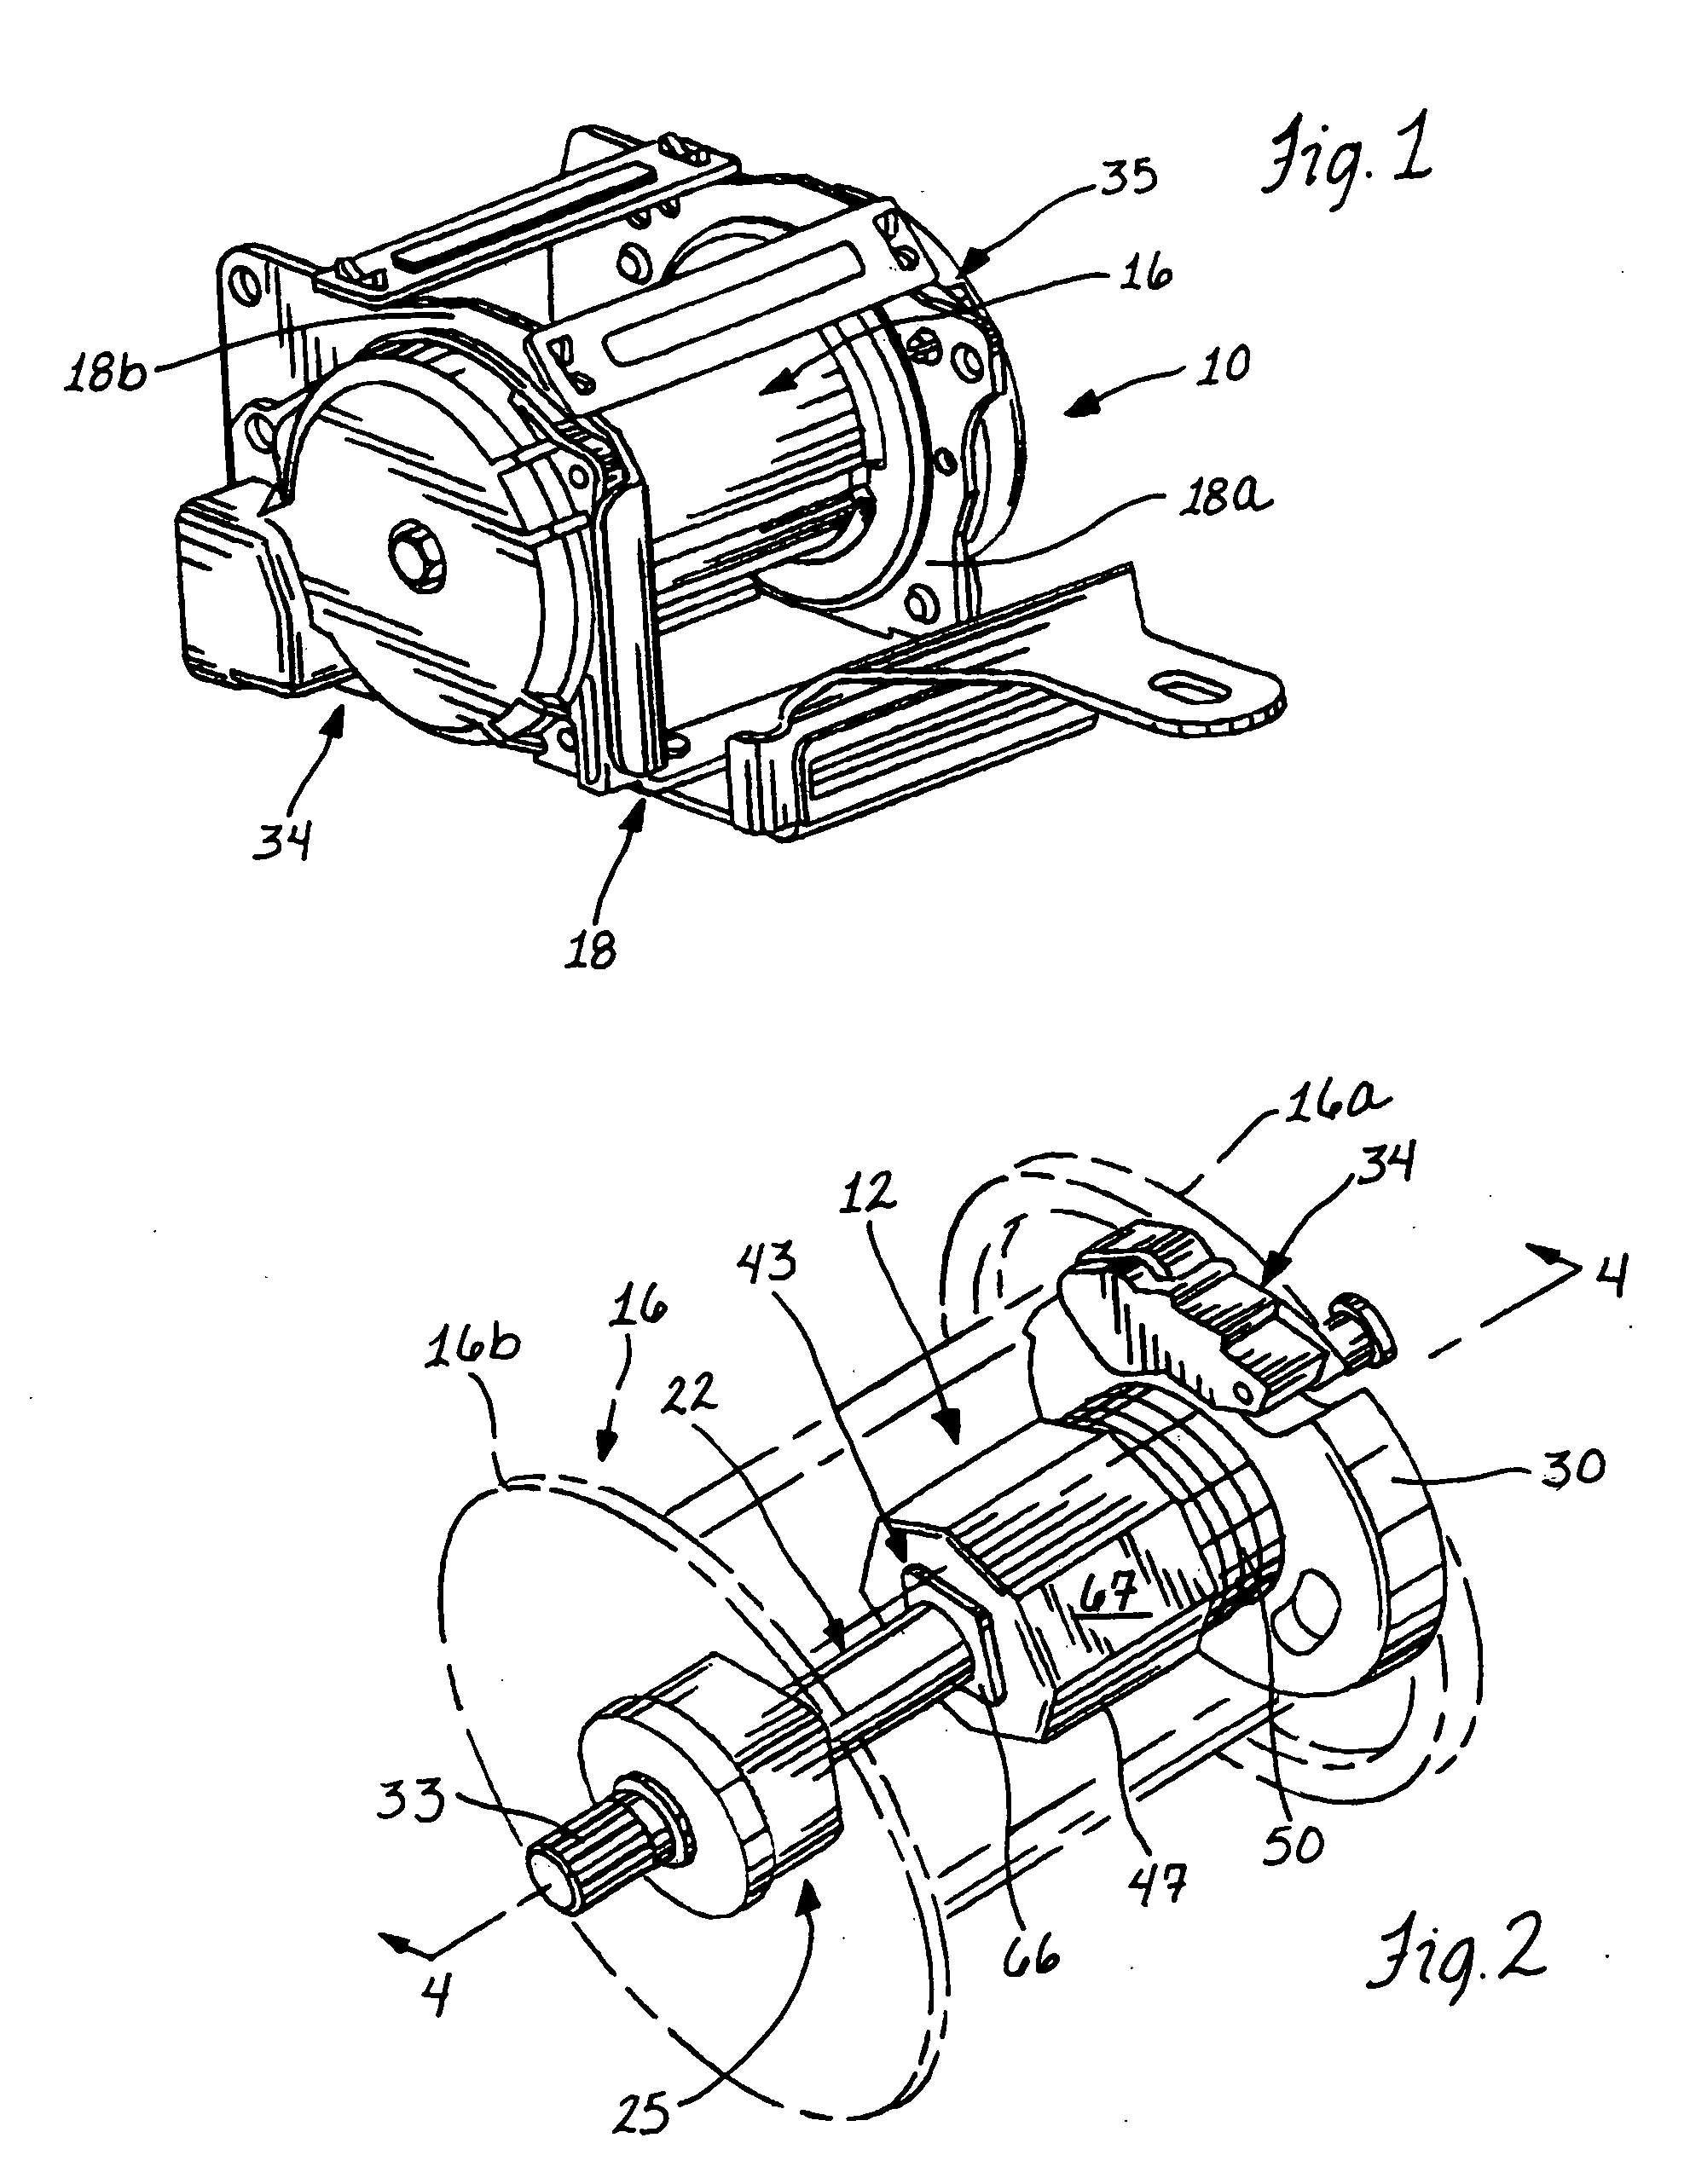 Retractor with multiple level load limiter